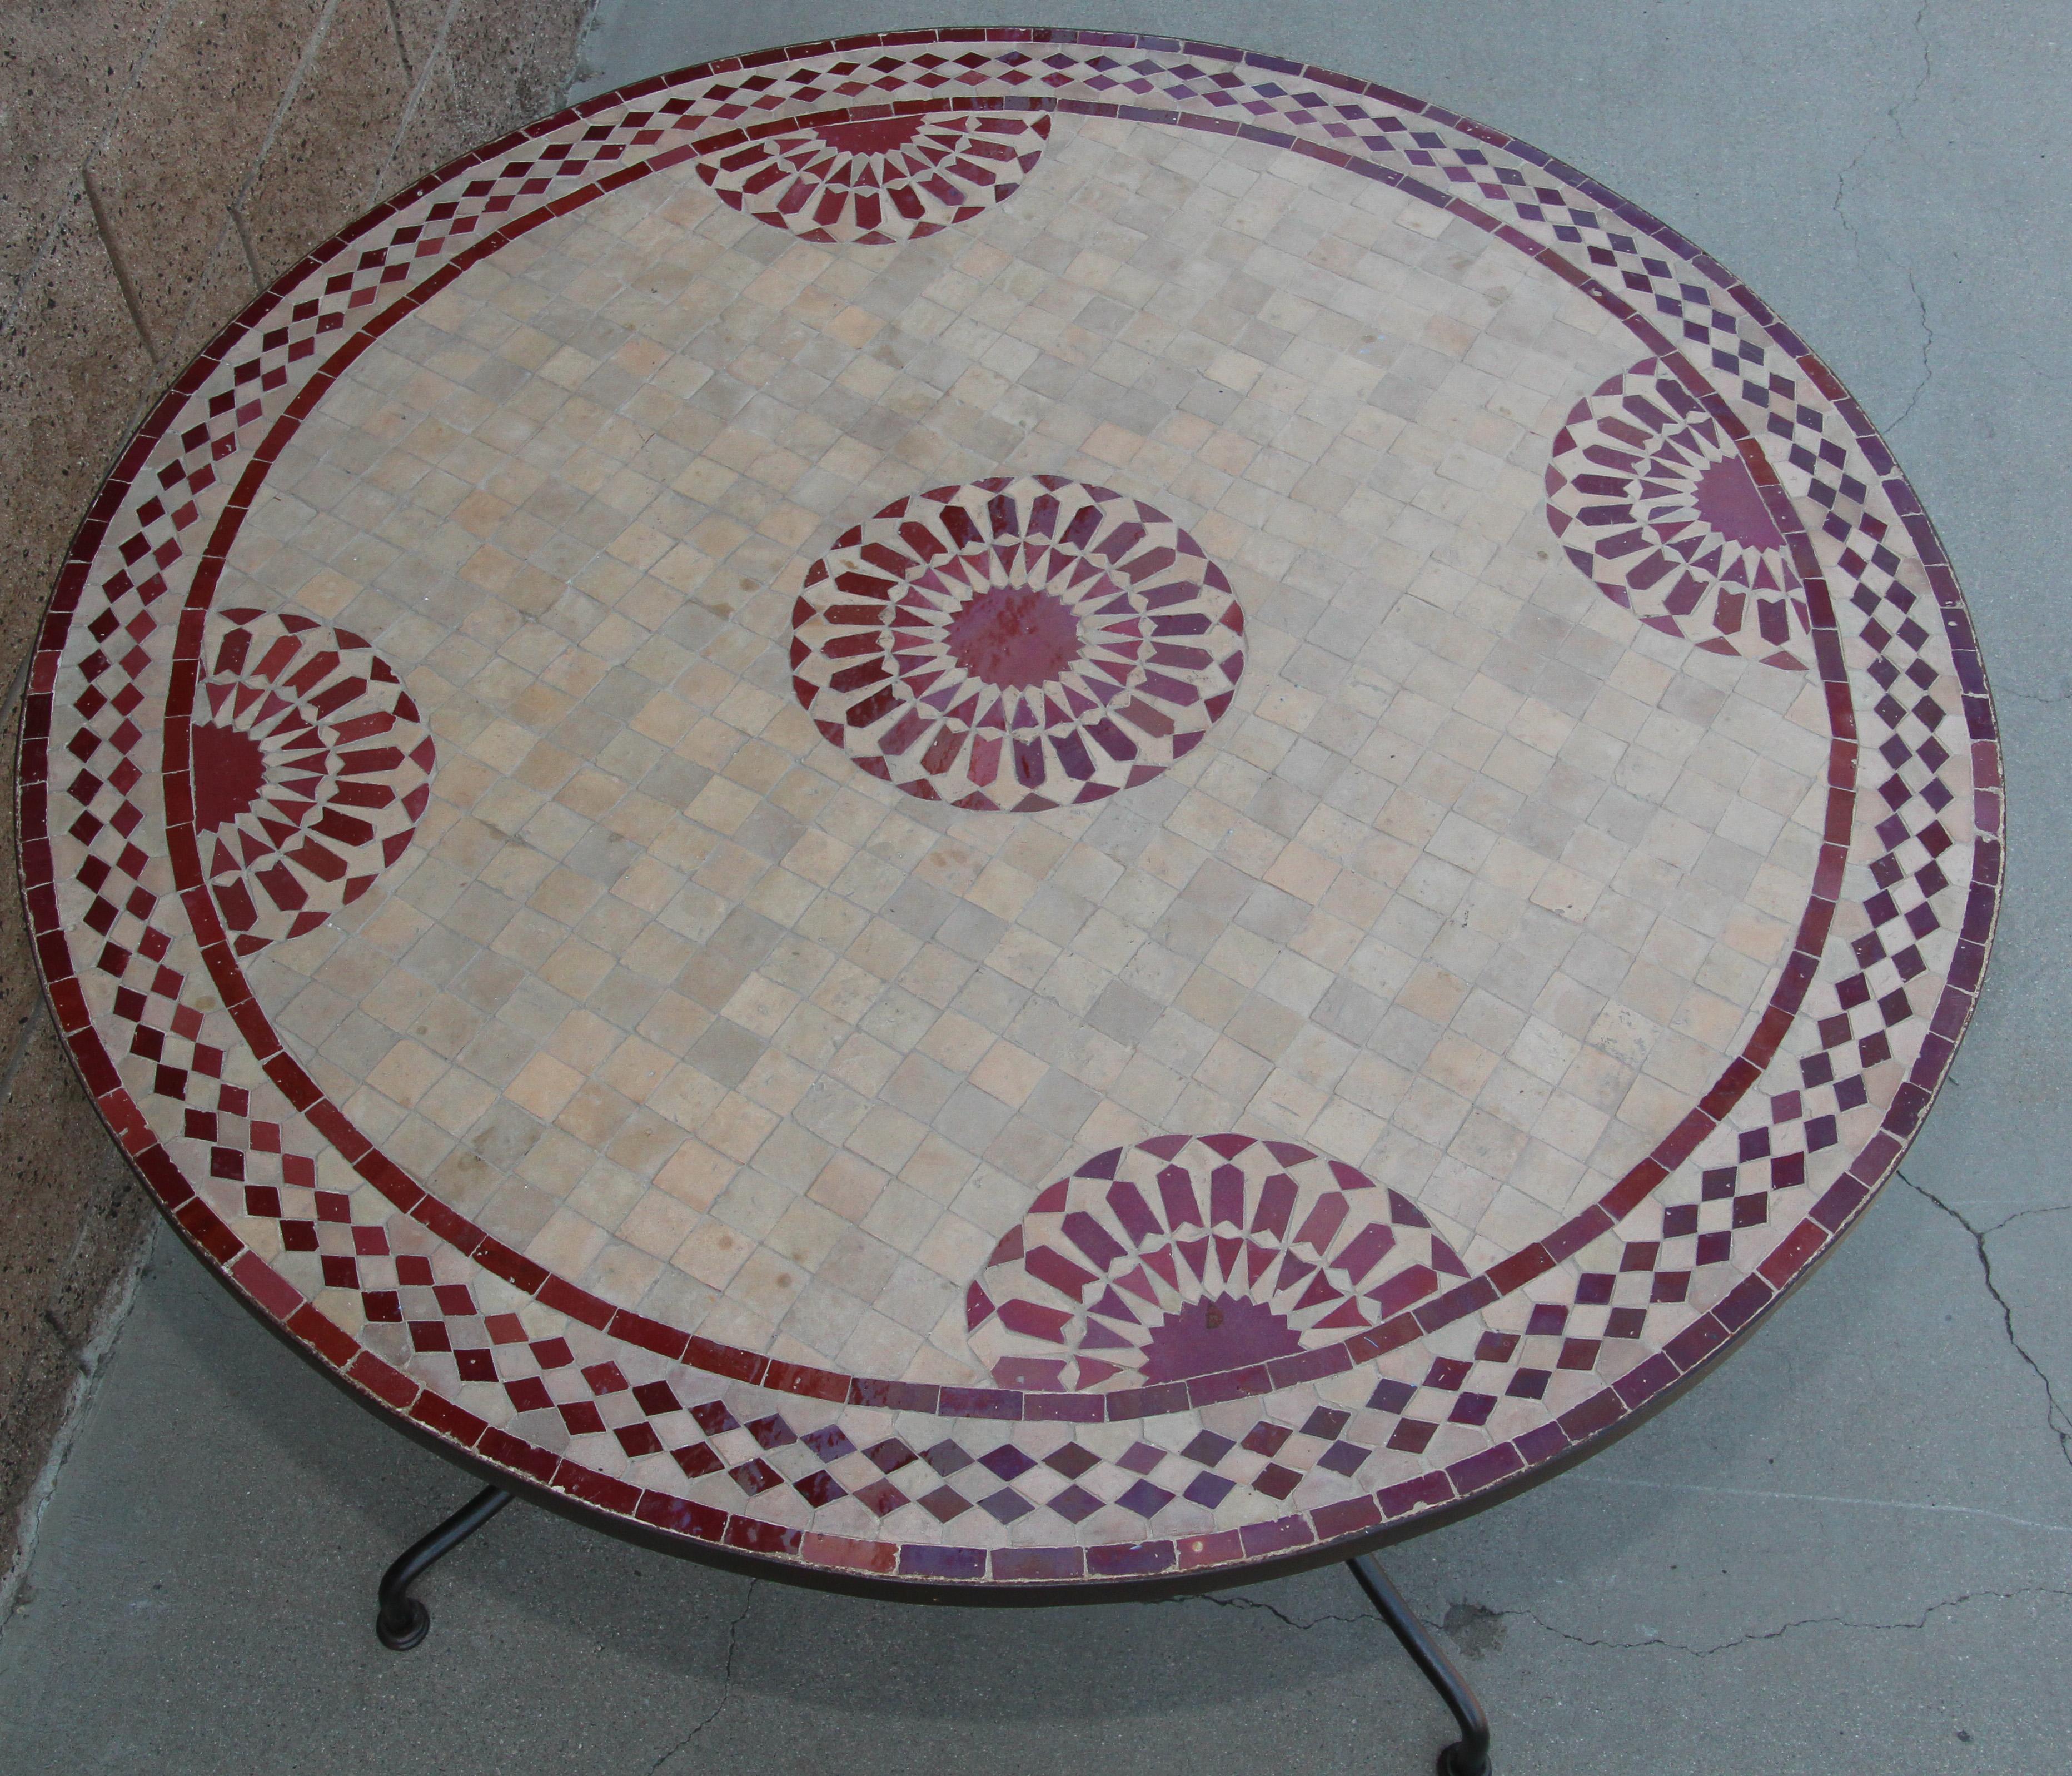 Blackened Moroccan Vintage Mosaic Tile Dining Table Indoor or Outdoor